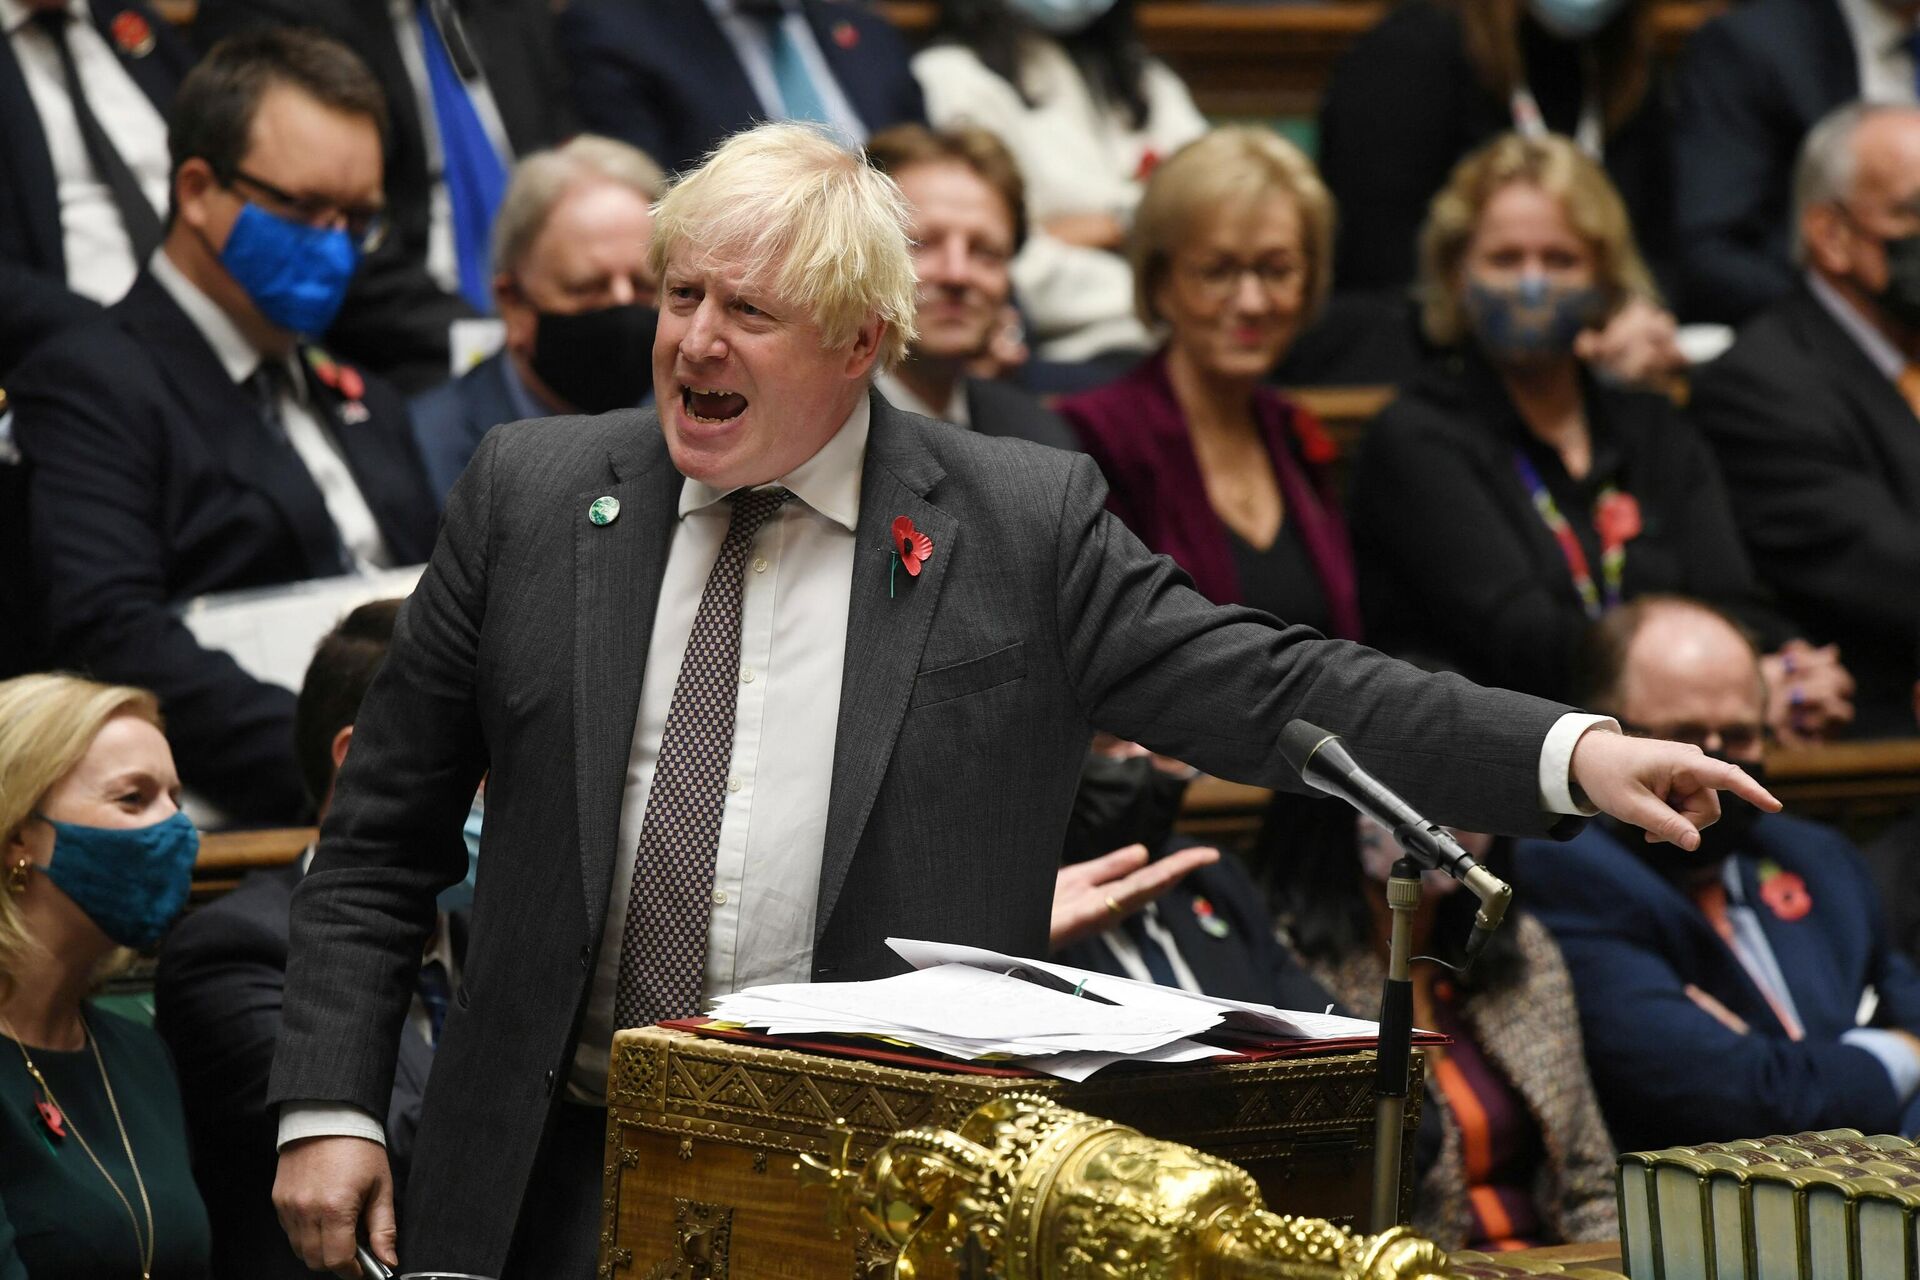 A handout photograph released by the UK Parliament shows Britain's Prime Minister Boris Johnson speaking during Prime Minister's Questions (PMQs) at the House of Commons, in central London on November 3, 2021  - Sputnik International, 1920, 23.11.2021